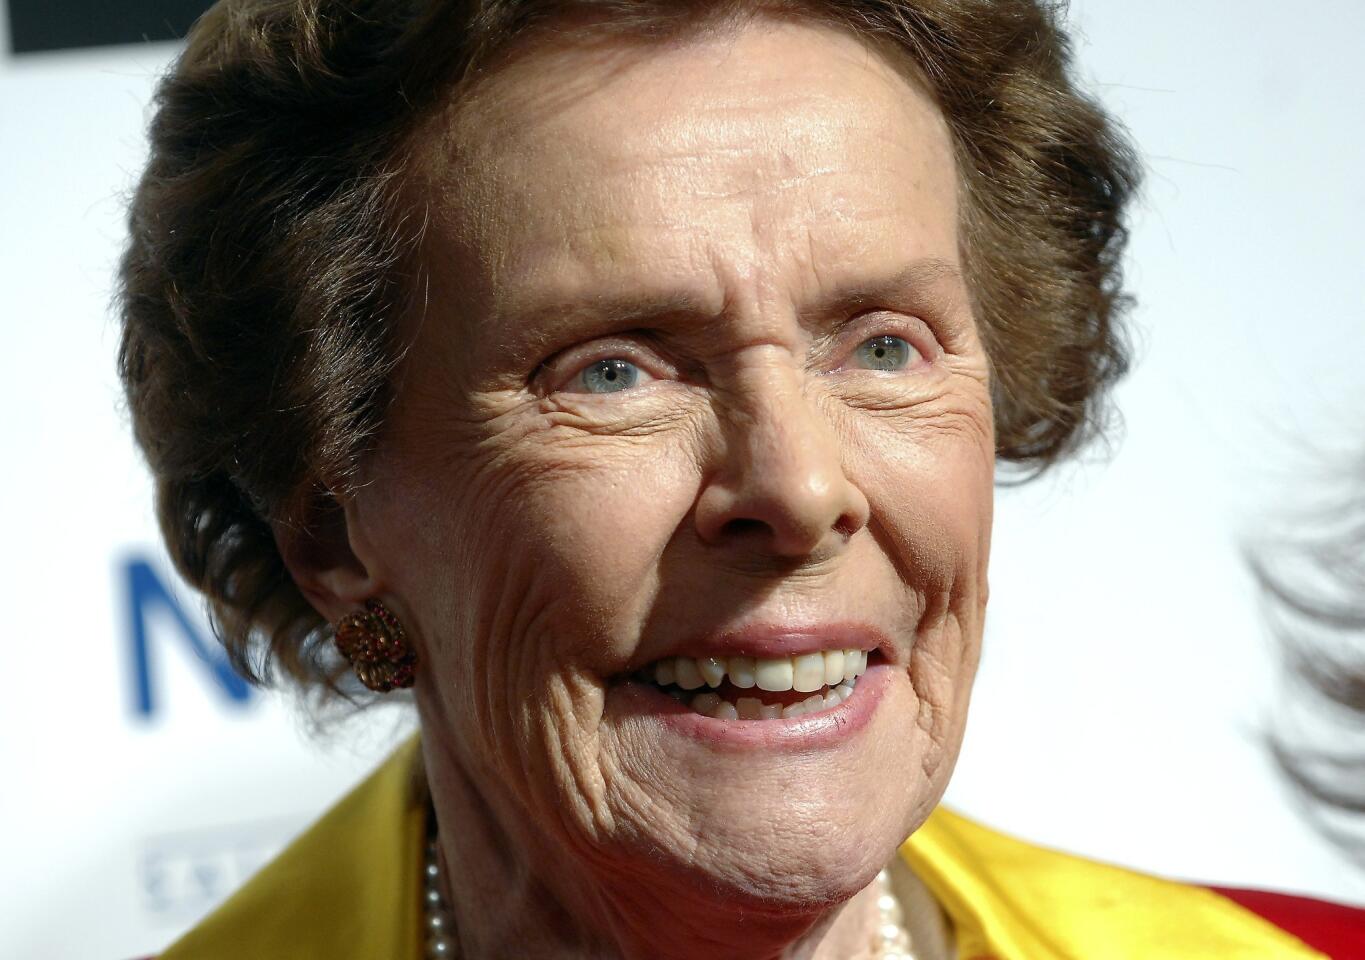 Eileen Ford, who co-founded Ford Models with her husband, reportedly died July 9, 2014 after having recently suffered a fall. She was 92.